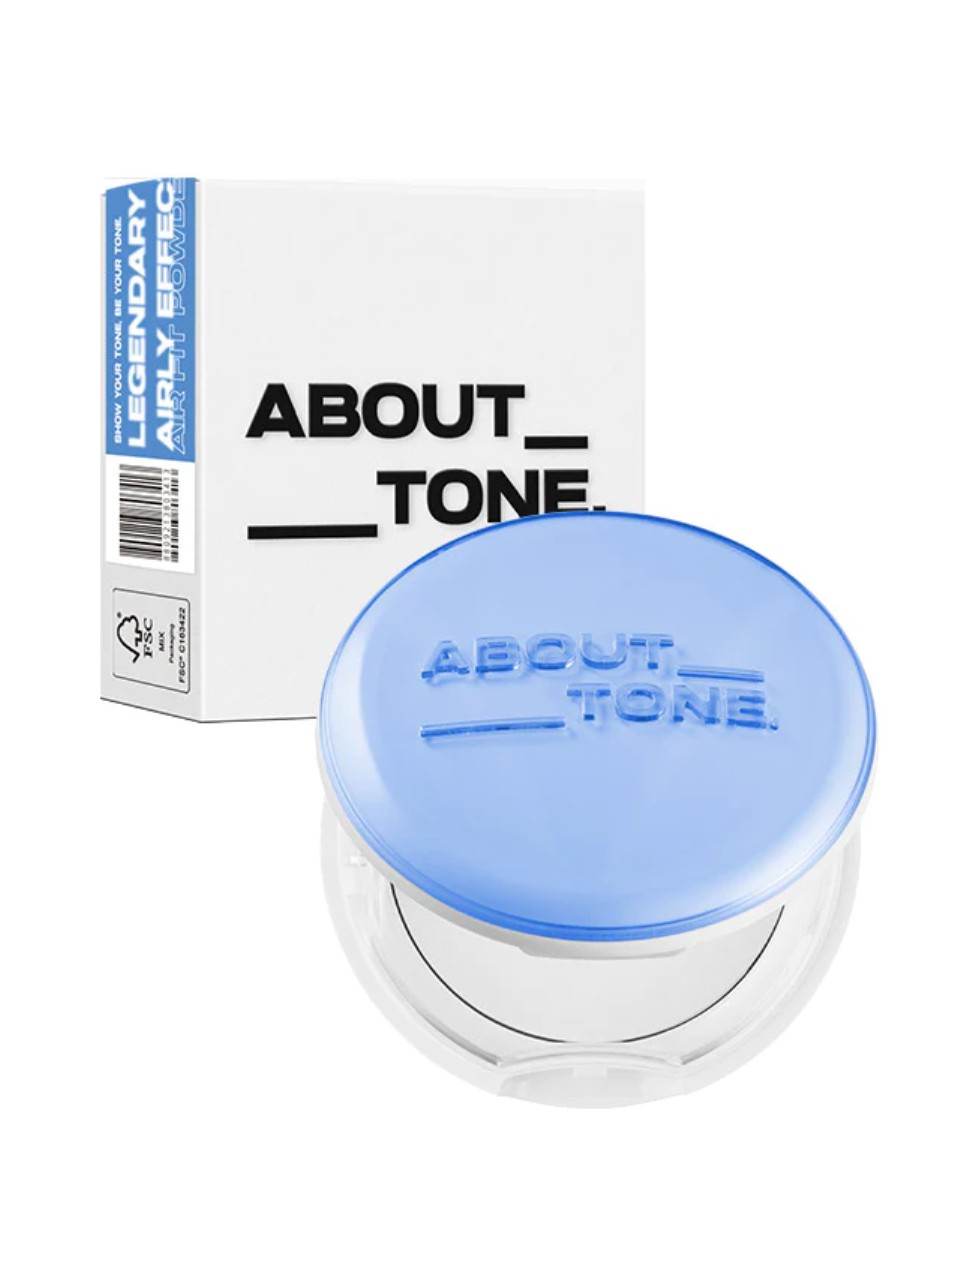 About Tone Air Fit Powder Pact